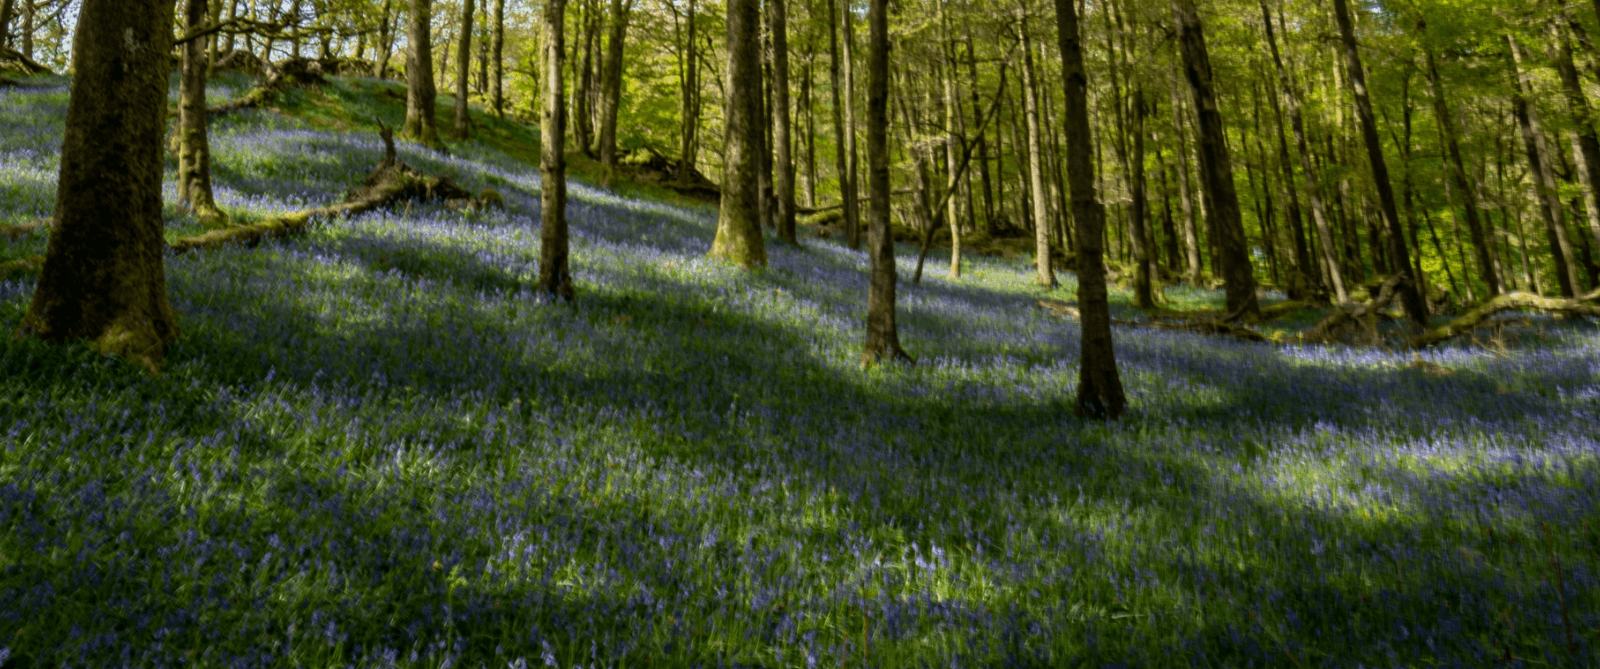 Bluebells in a sustainable wooded area.